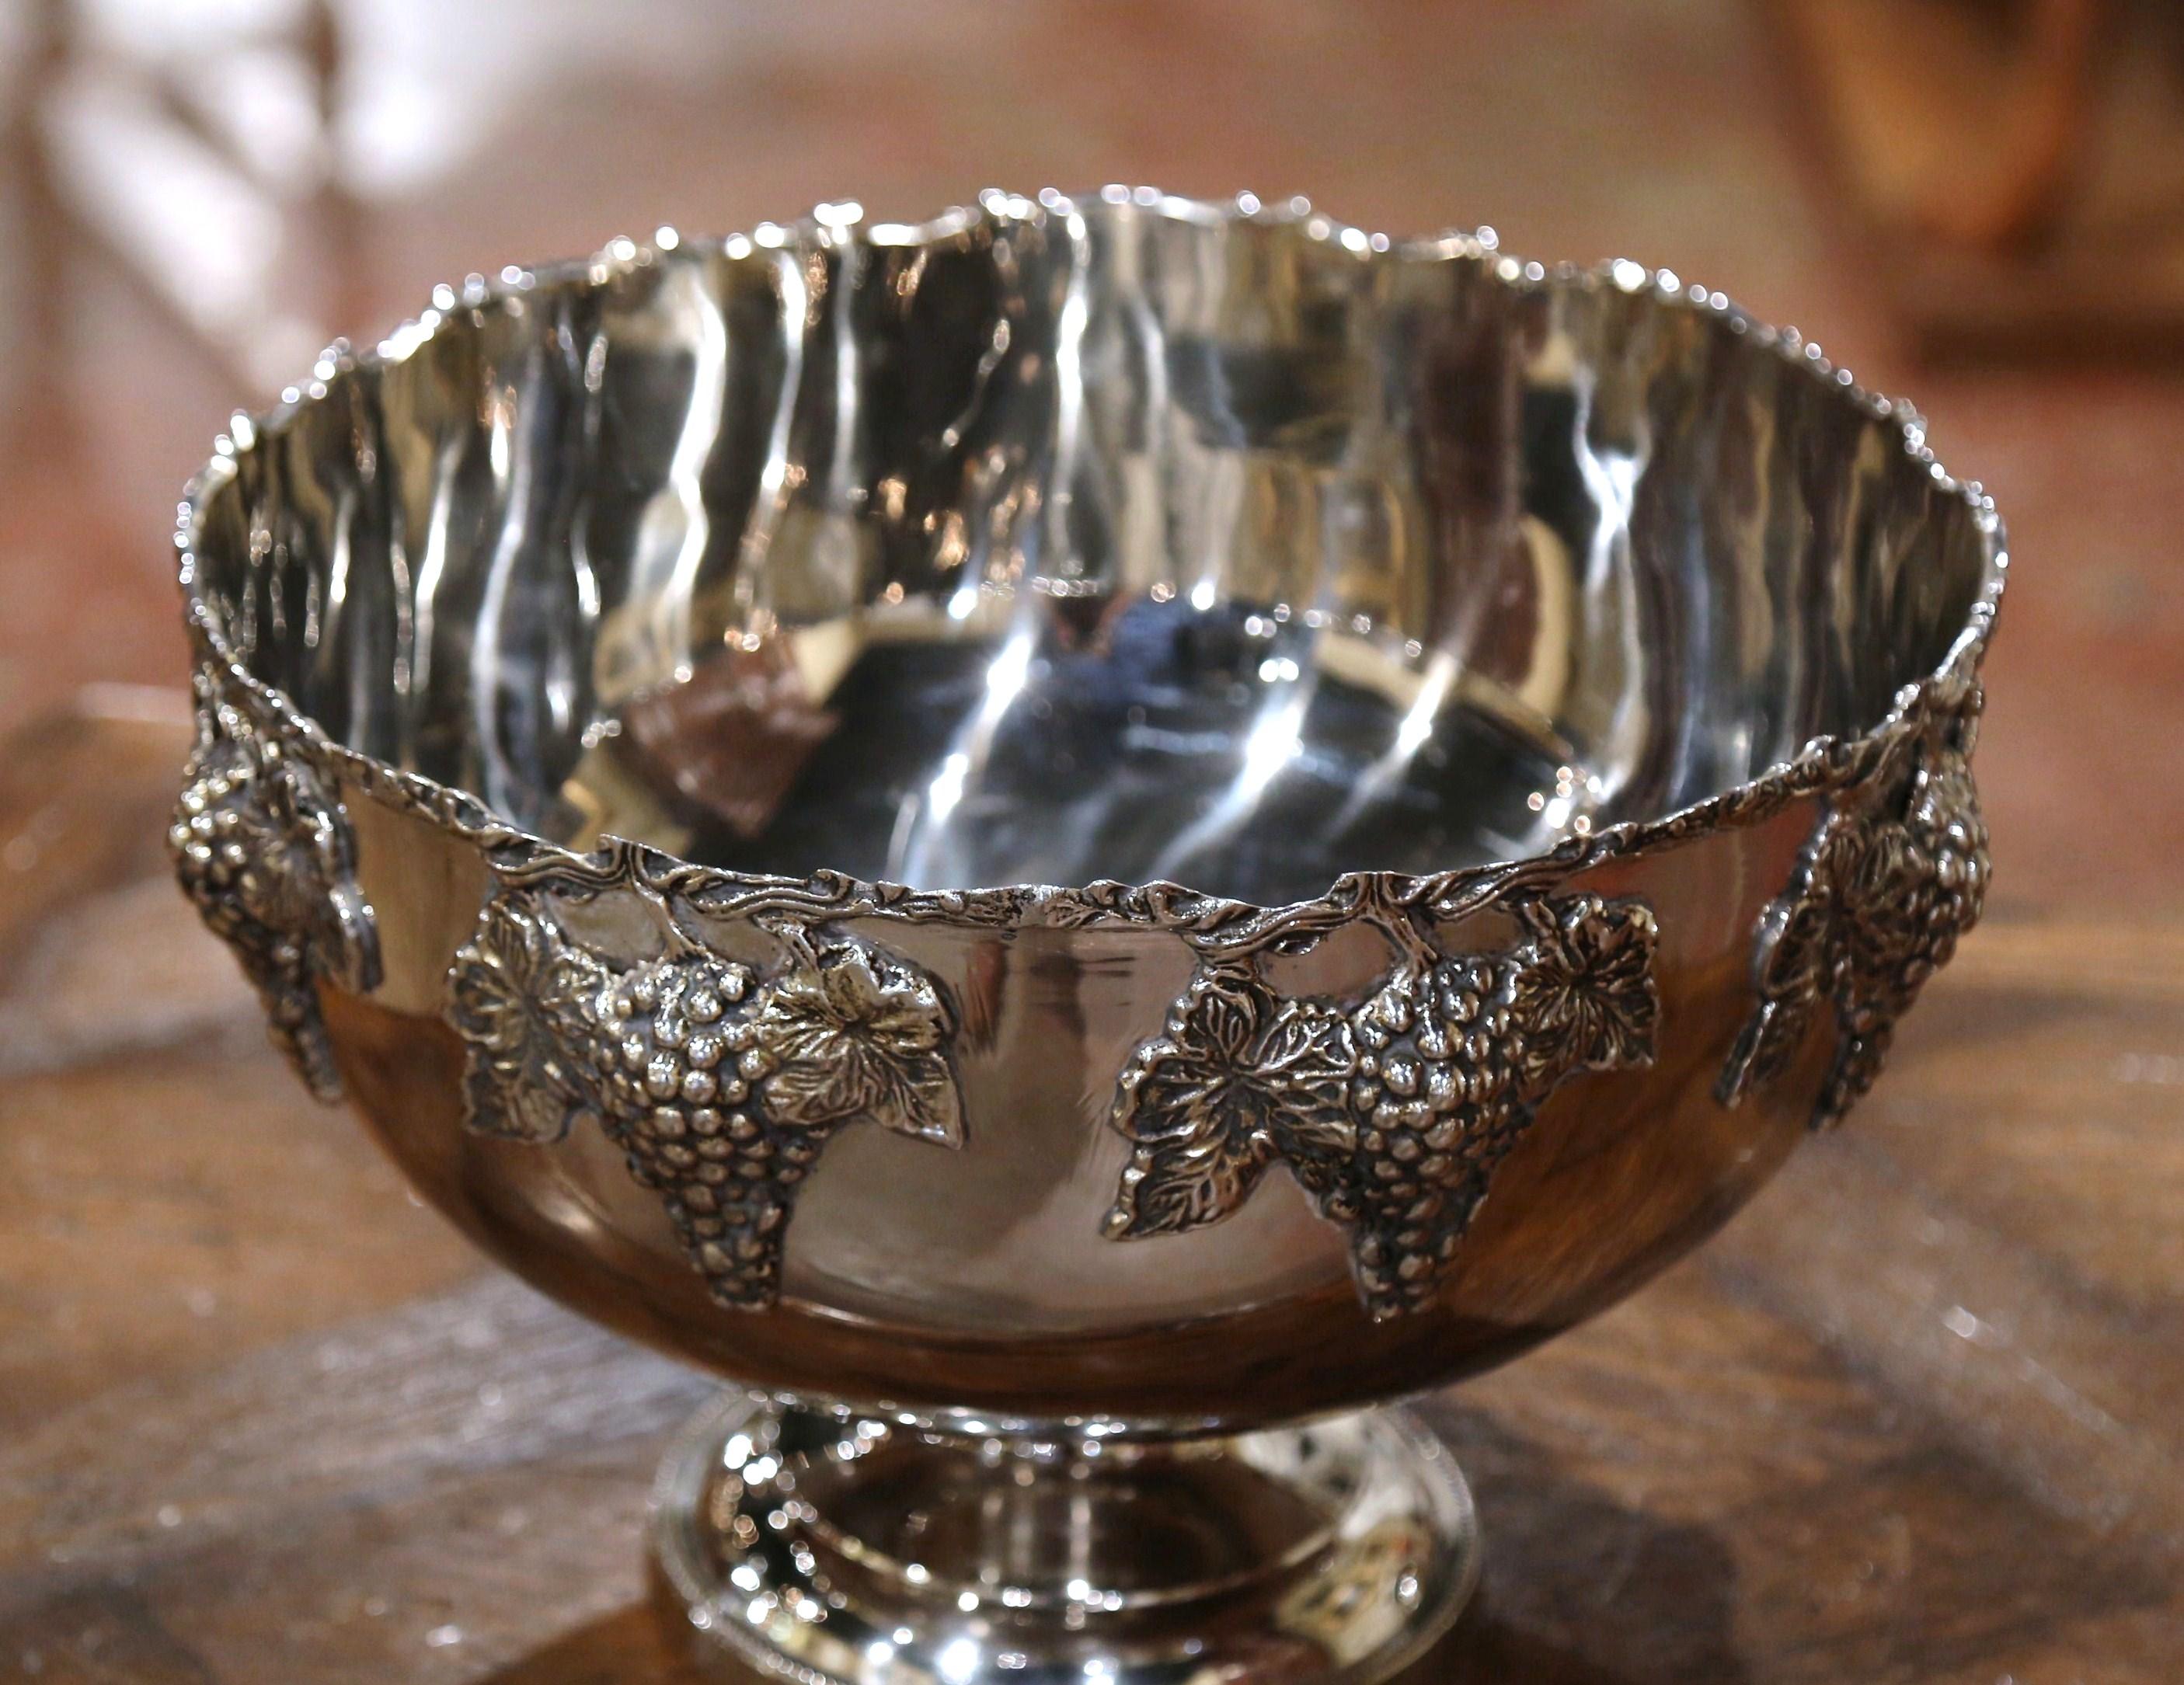 Metal Mid-20th Century French Silver Plated Wine Cooler Bowl with Grape and Vine Decor